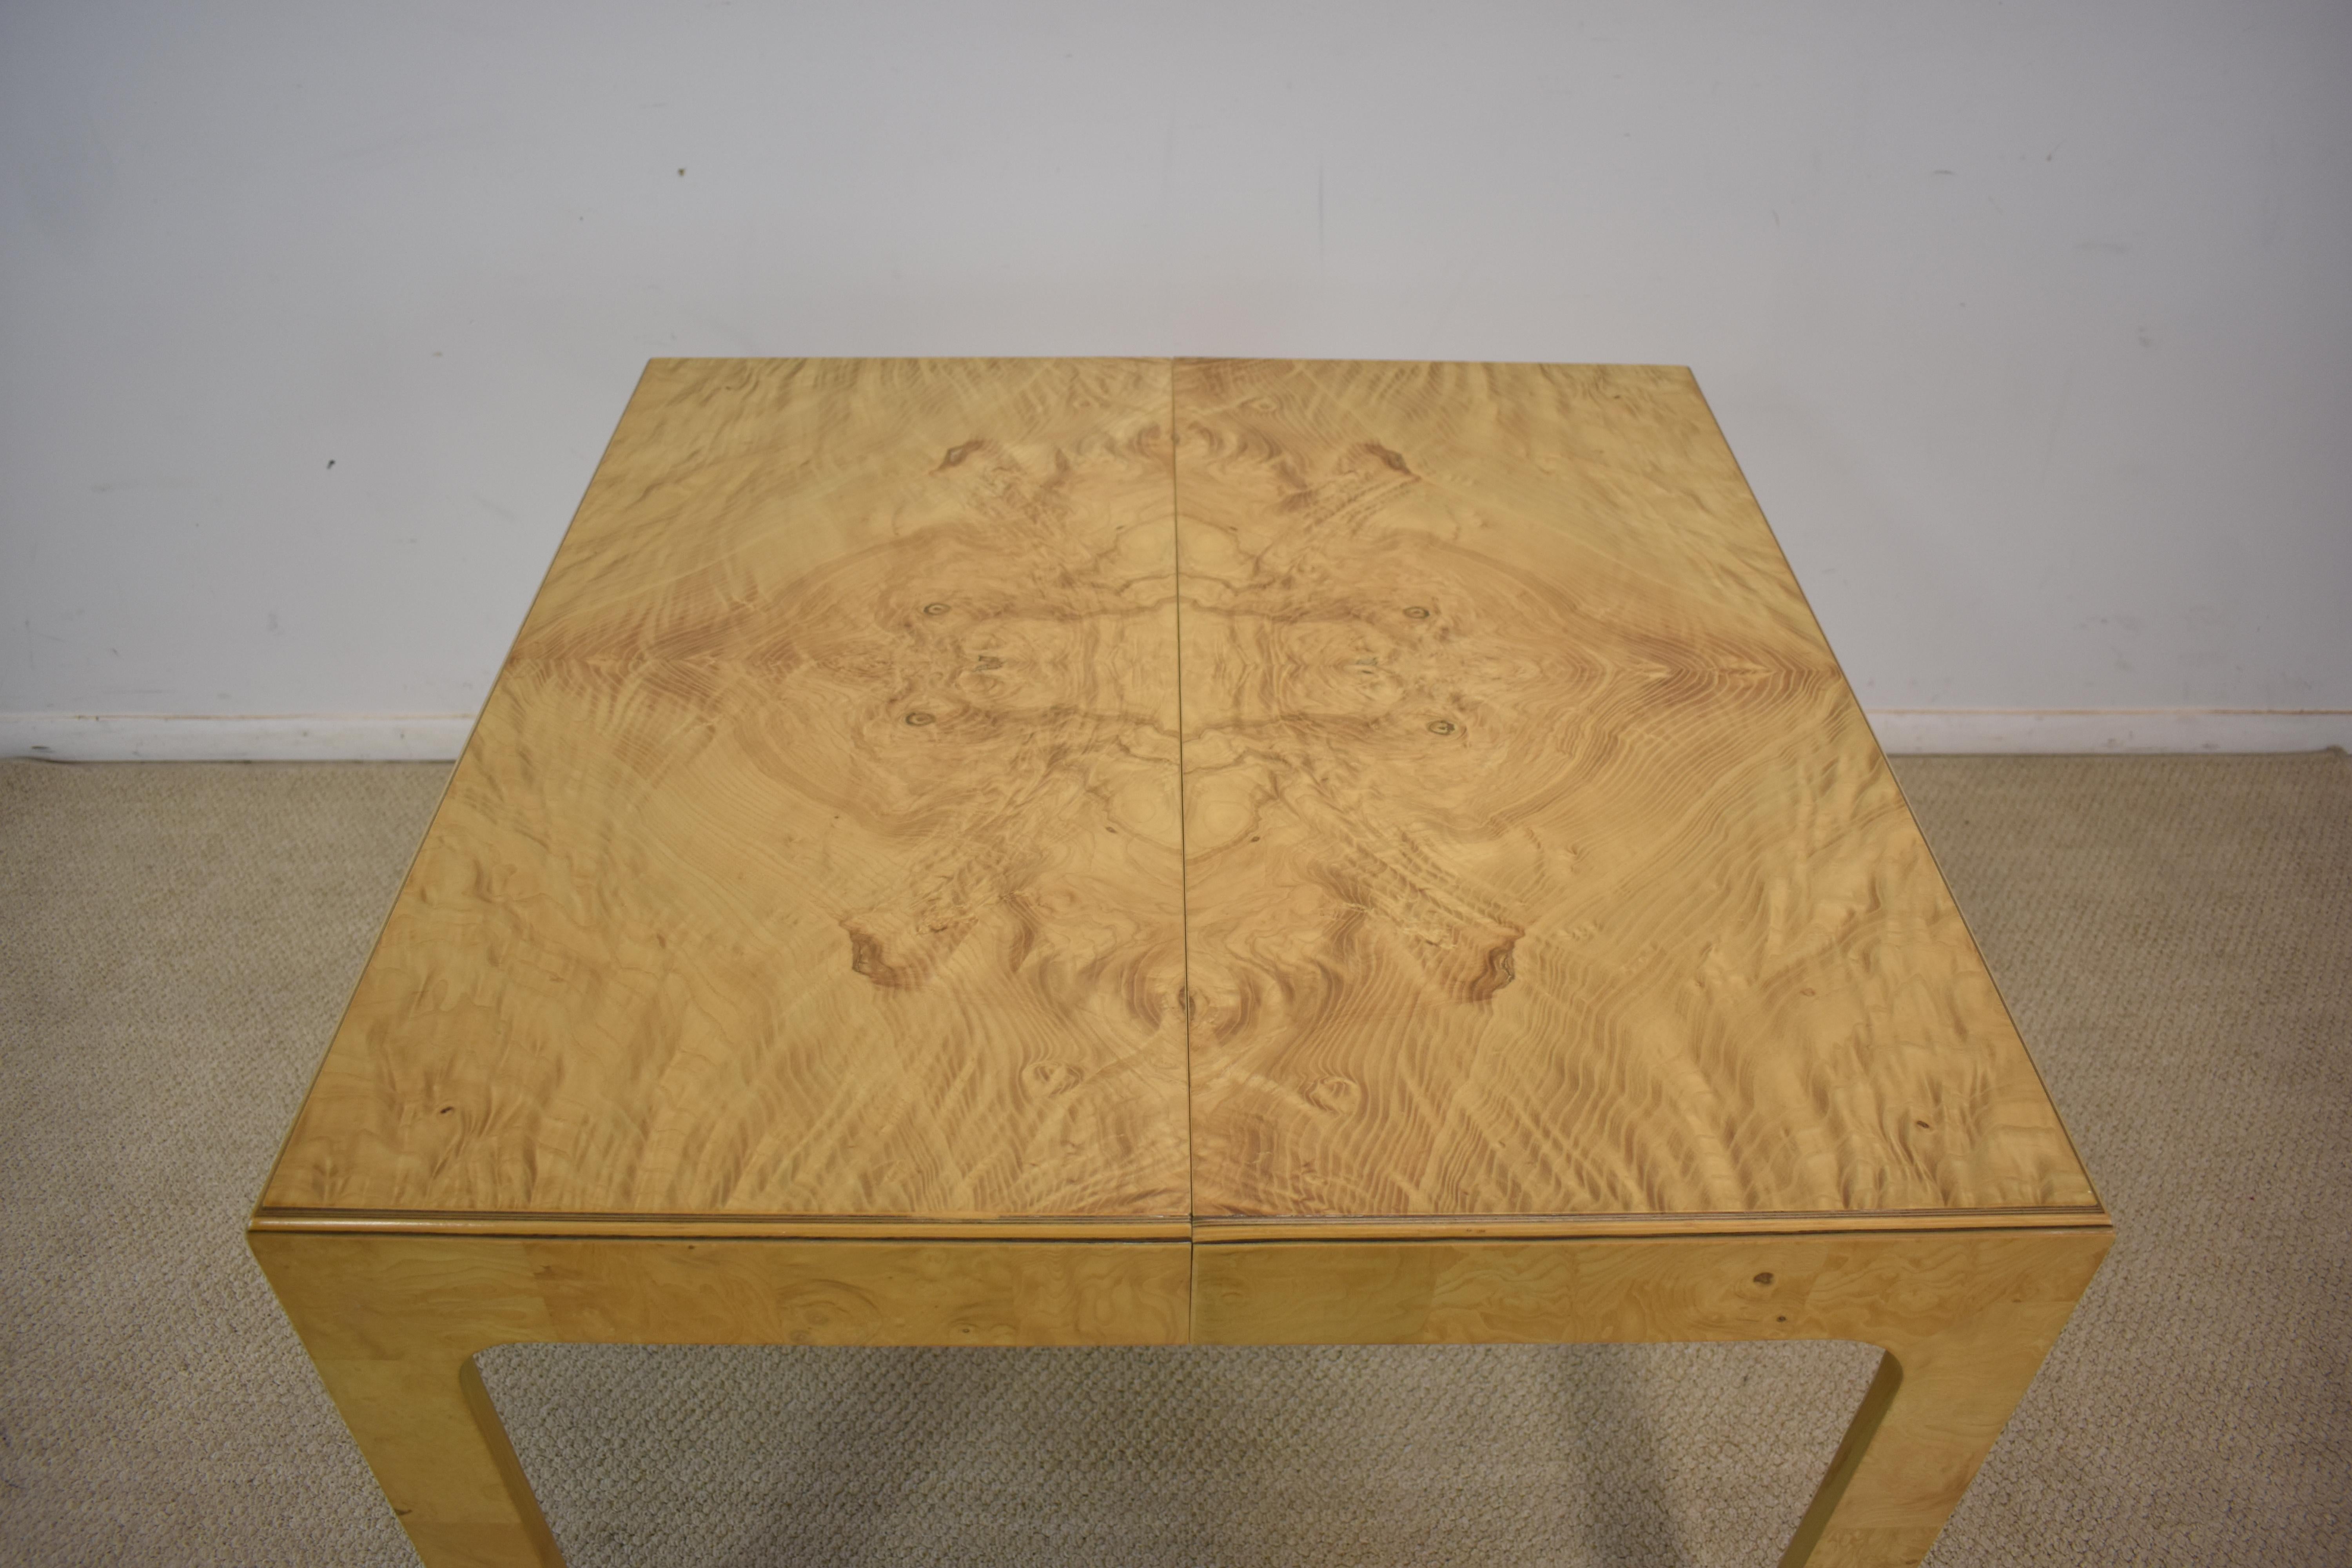 Modern Olivewood Game Table Attributed to Henredon Furniture Company